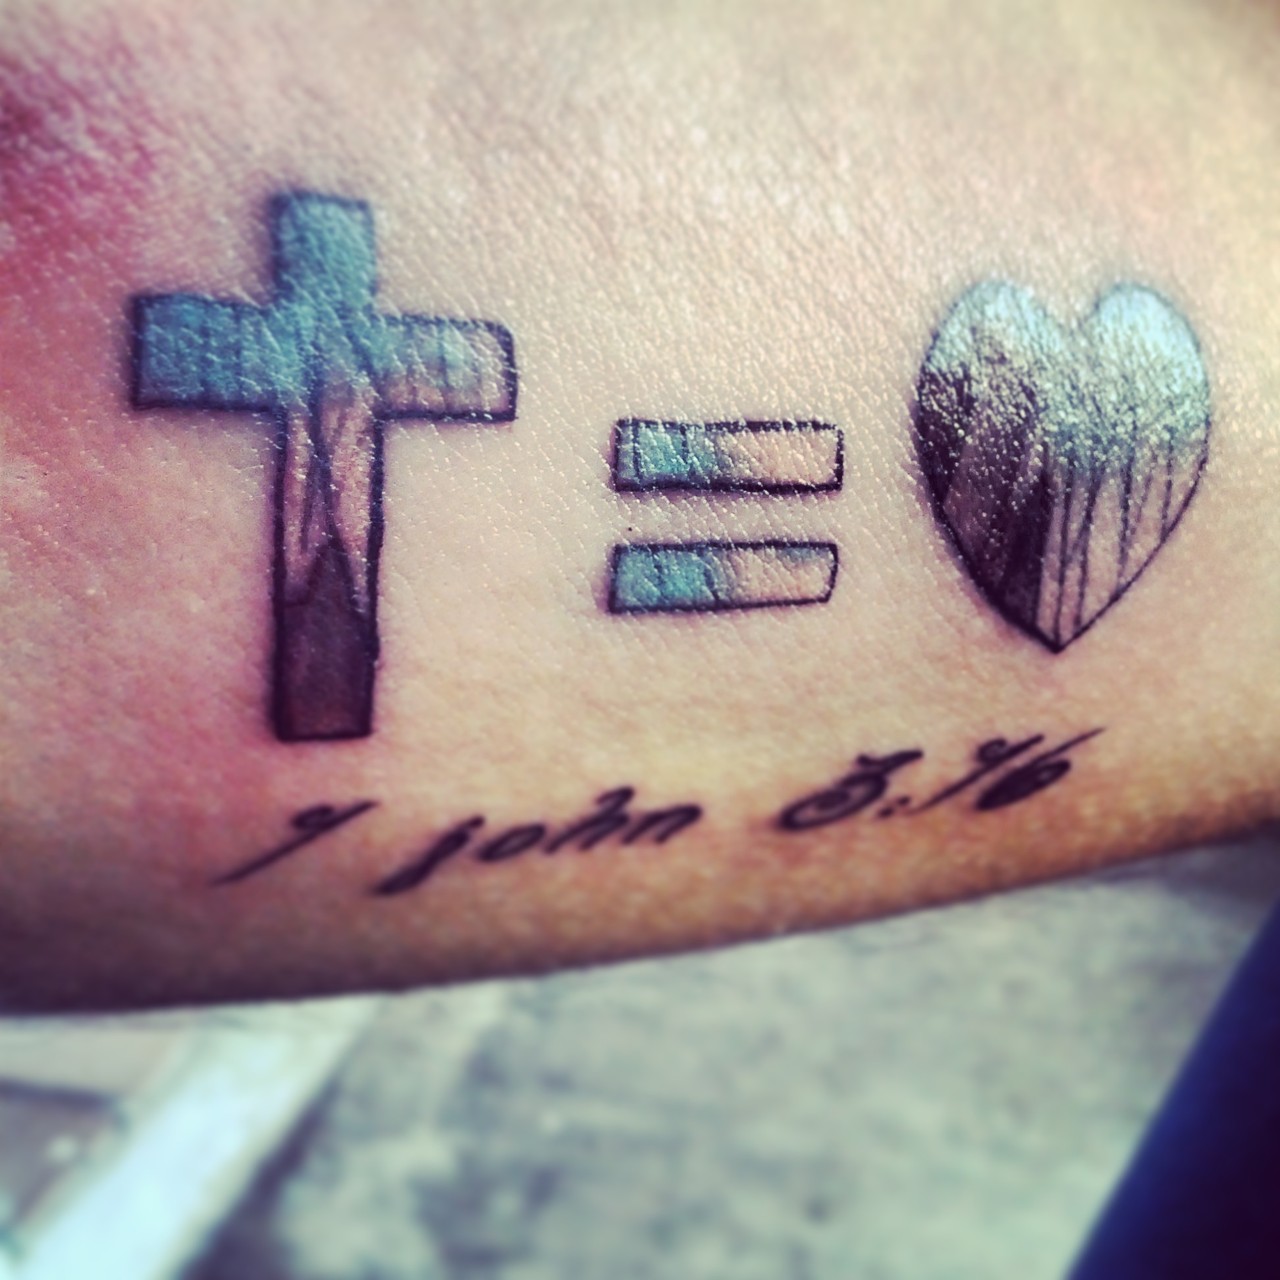 Christian Cross With Heart Tattoo Design For Forearm